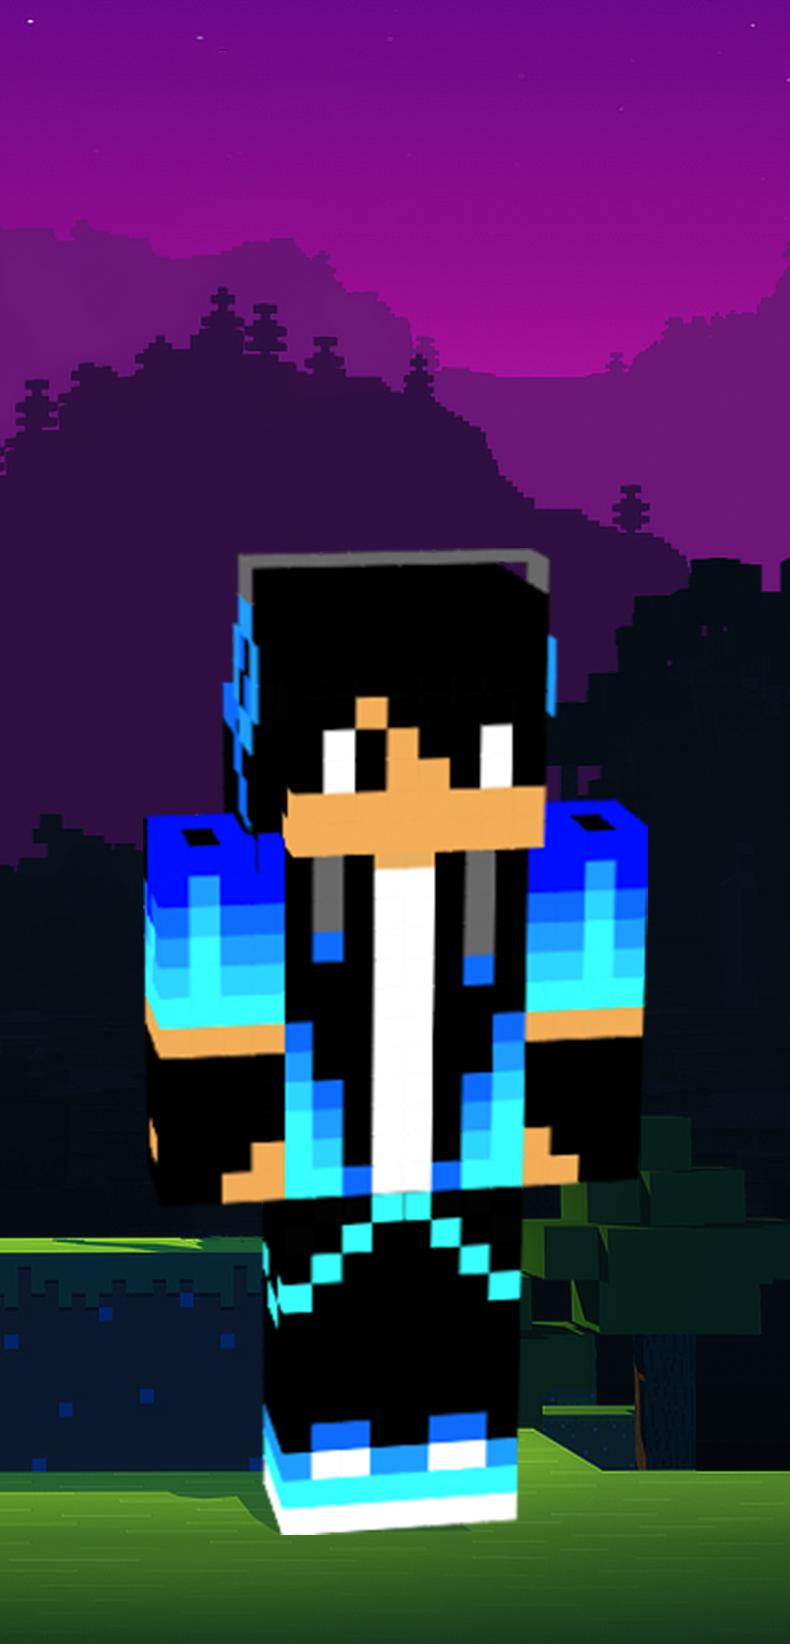 Cool Boy Minecraft Skins for Android - APK Download